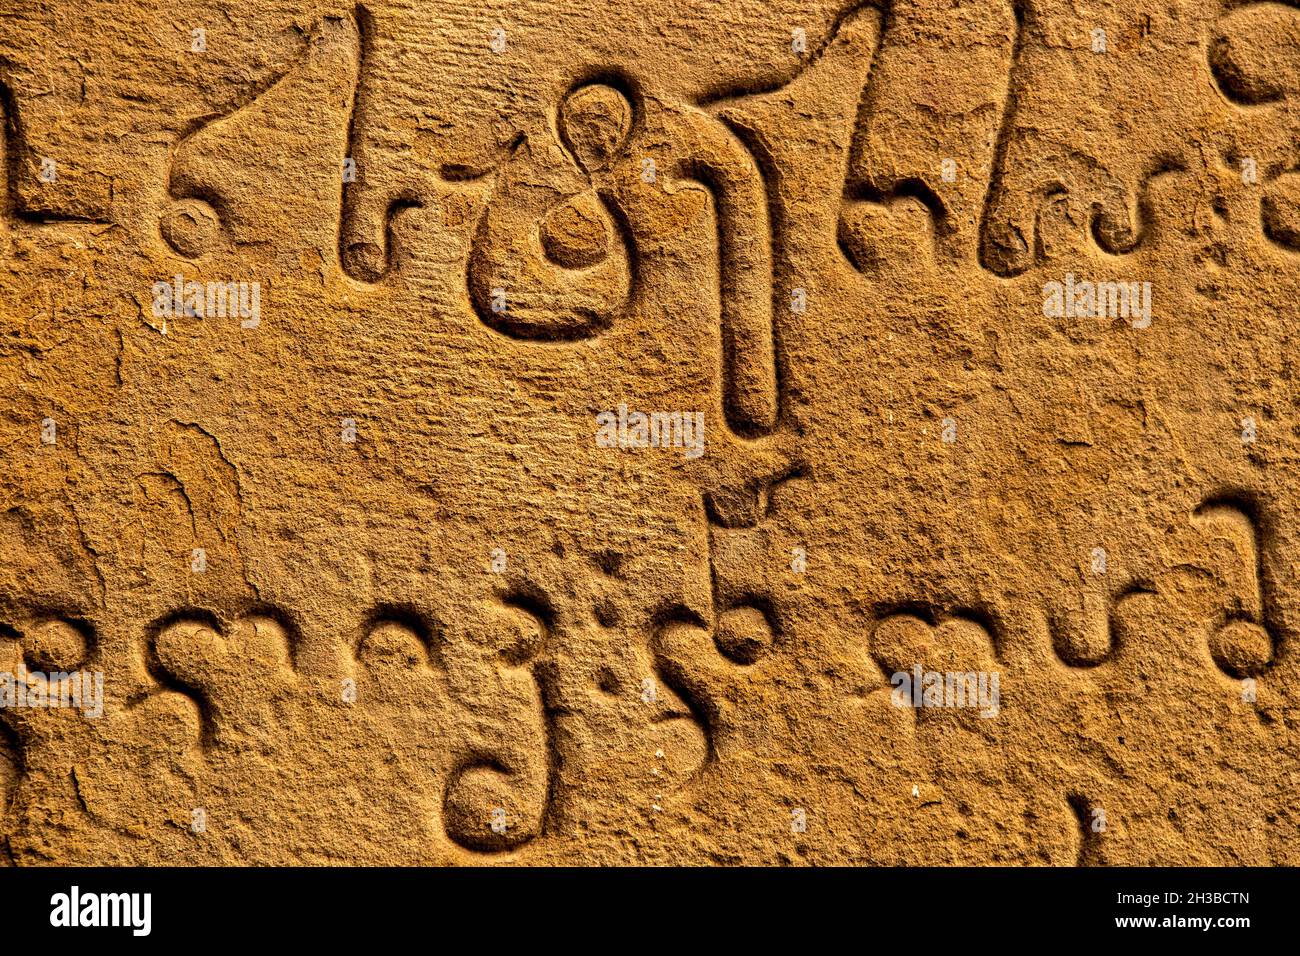 Close-up Ancient carving of Mkhedruli alphabet developed between the 11th and 13th centuries - official language of Georgia - on old grainy sandstone Stock Photo